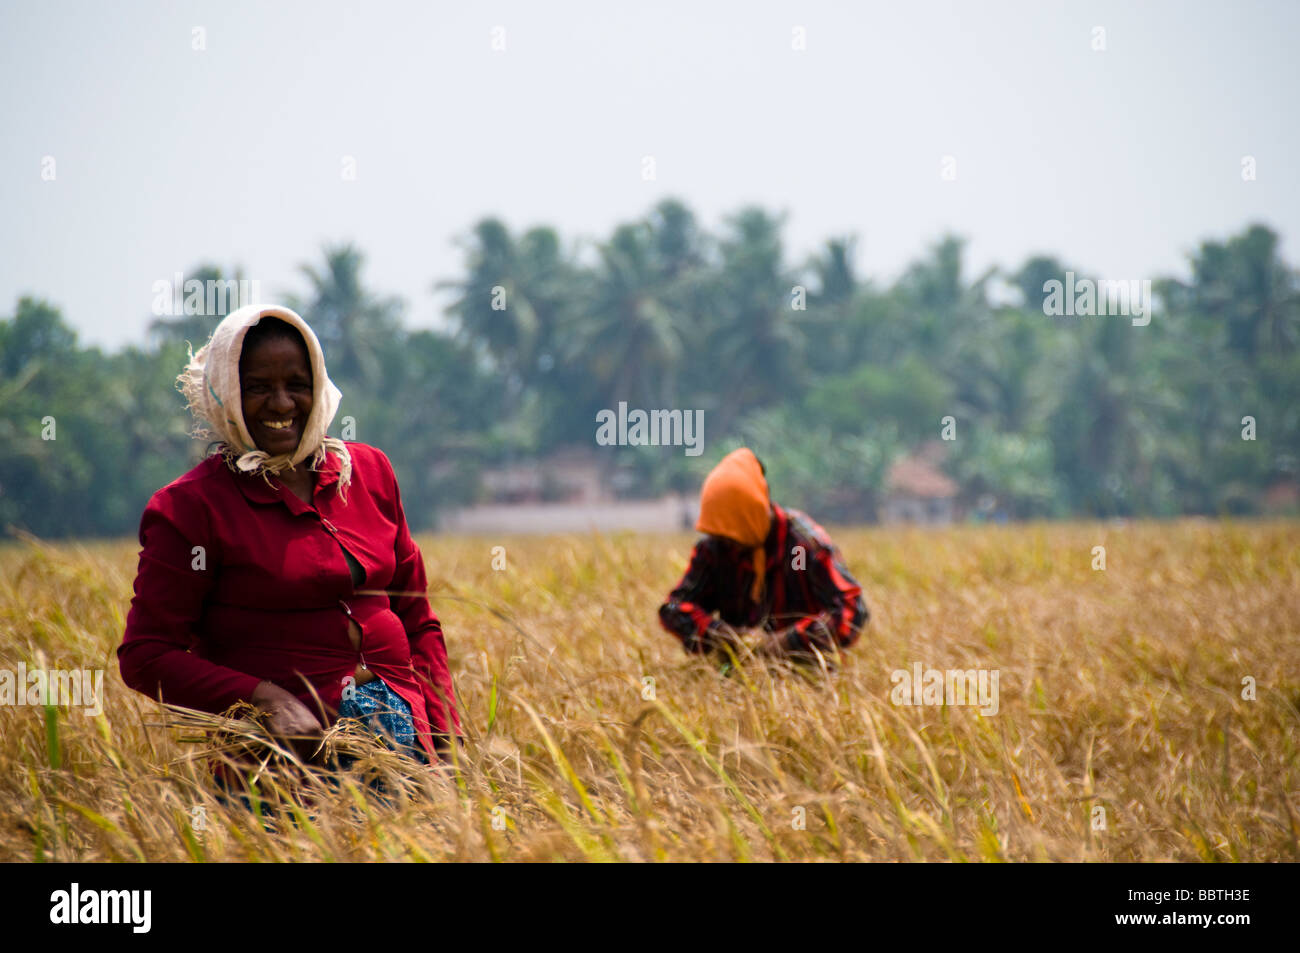 Woman harvesting rice in paddy field, India Stock Photo